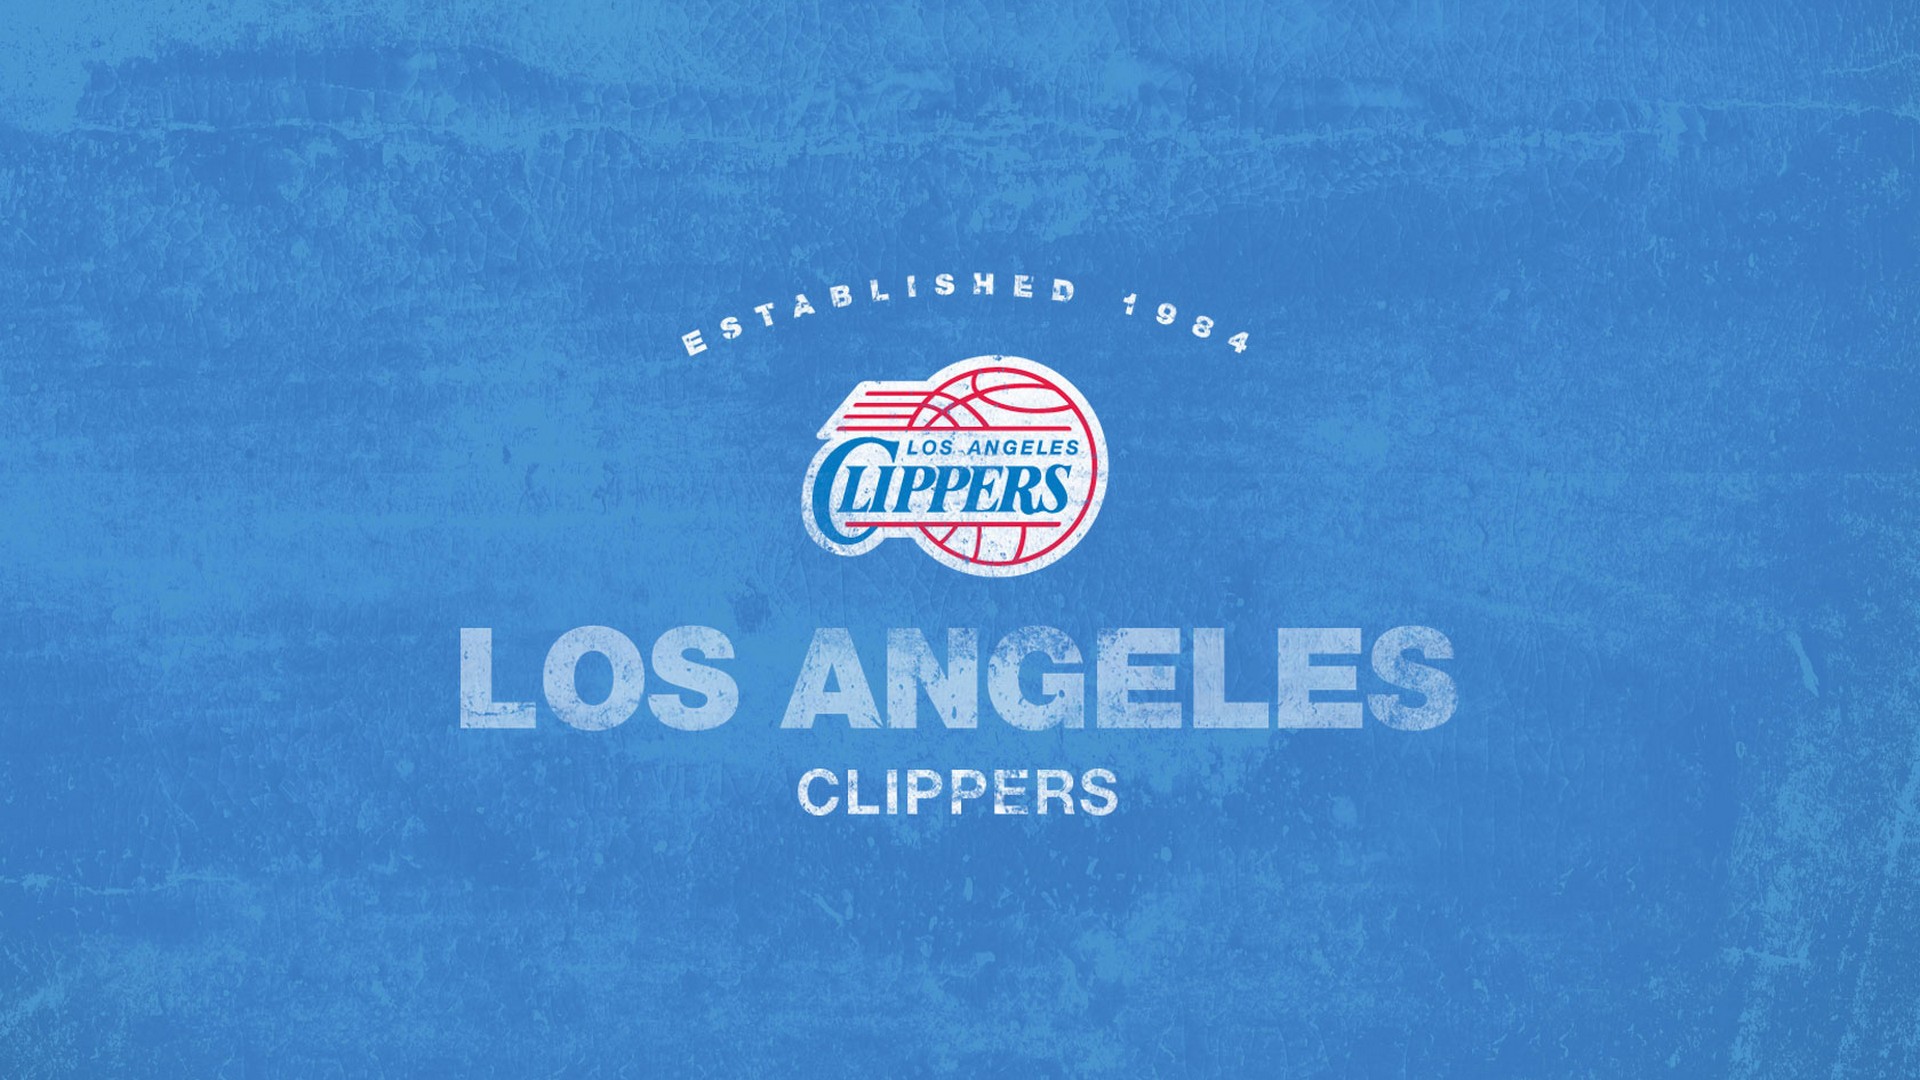 Los Angeles Clippers Wallpaper HD 1920x1080